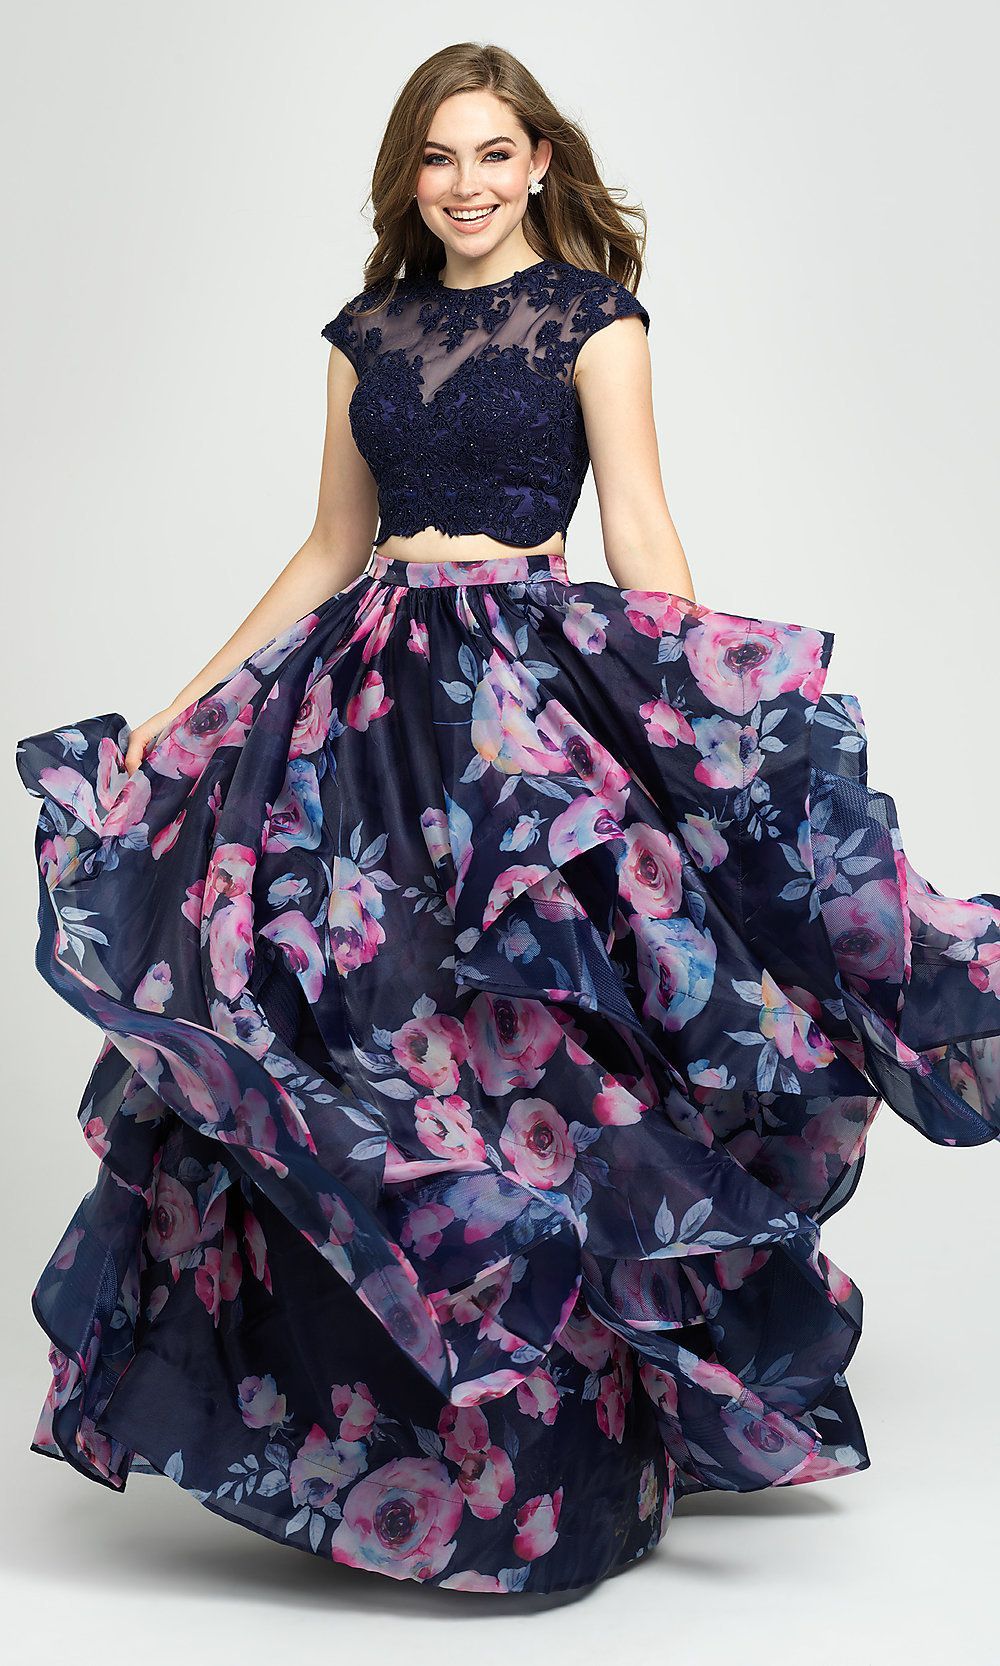 Two-Piece Navy Floral-Print Prom Dress with Beads - Two-Piece Navy Floral-Print Prom Dress with Beads -   20 beauty Dresses two piece ideas